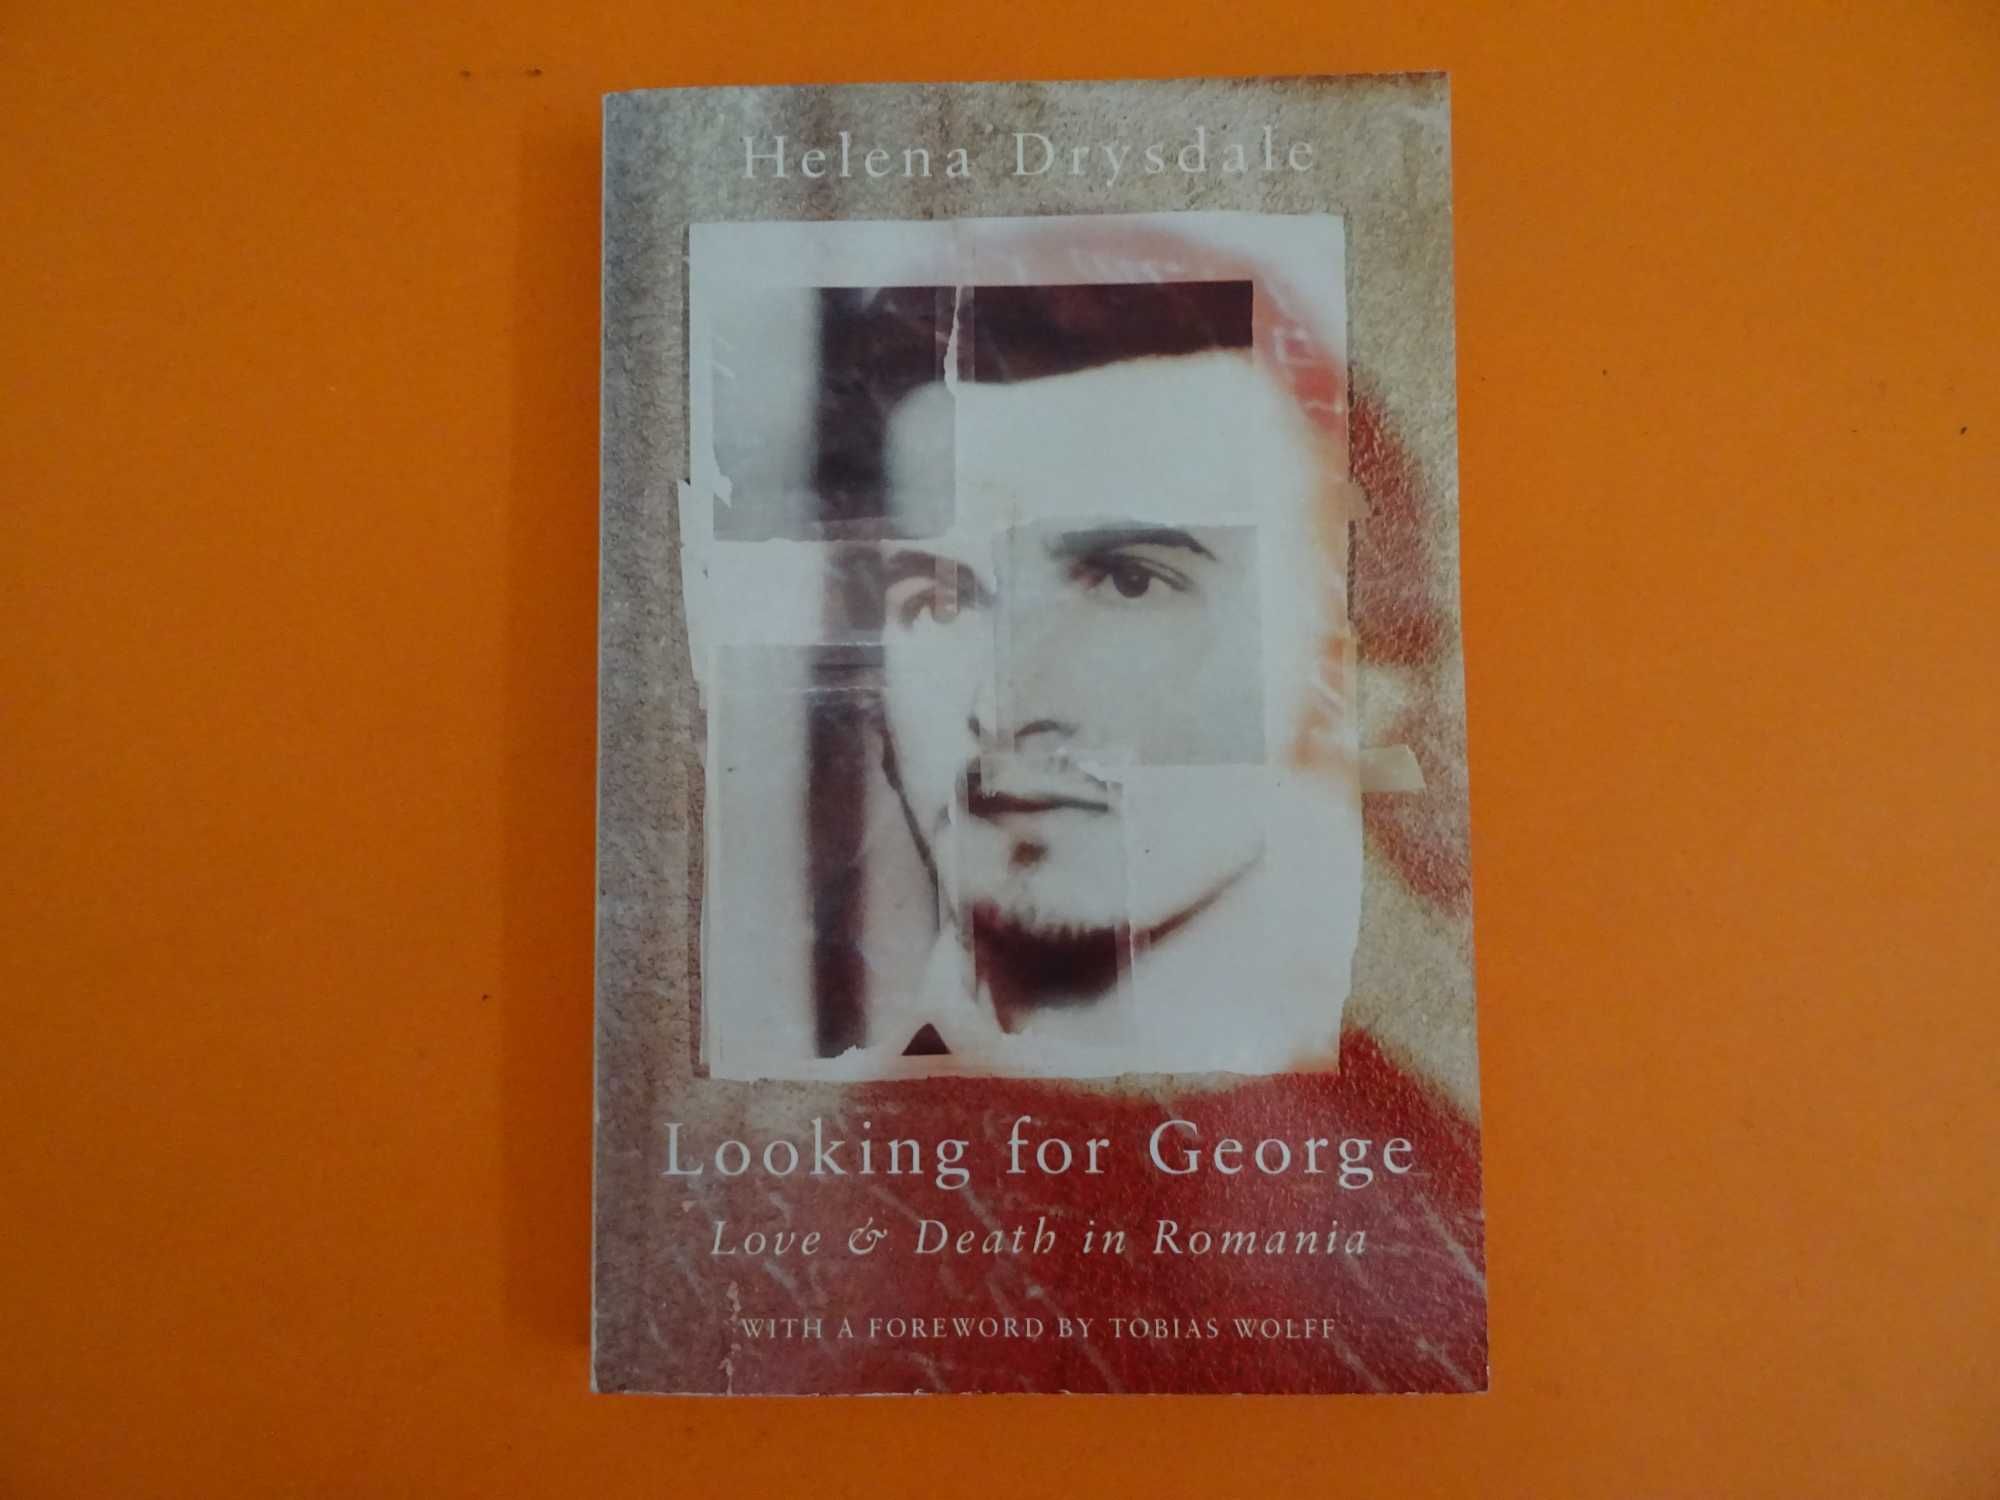 Looking for George – Love & Death in Romania - Helena Drysdale